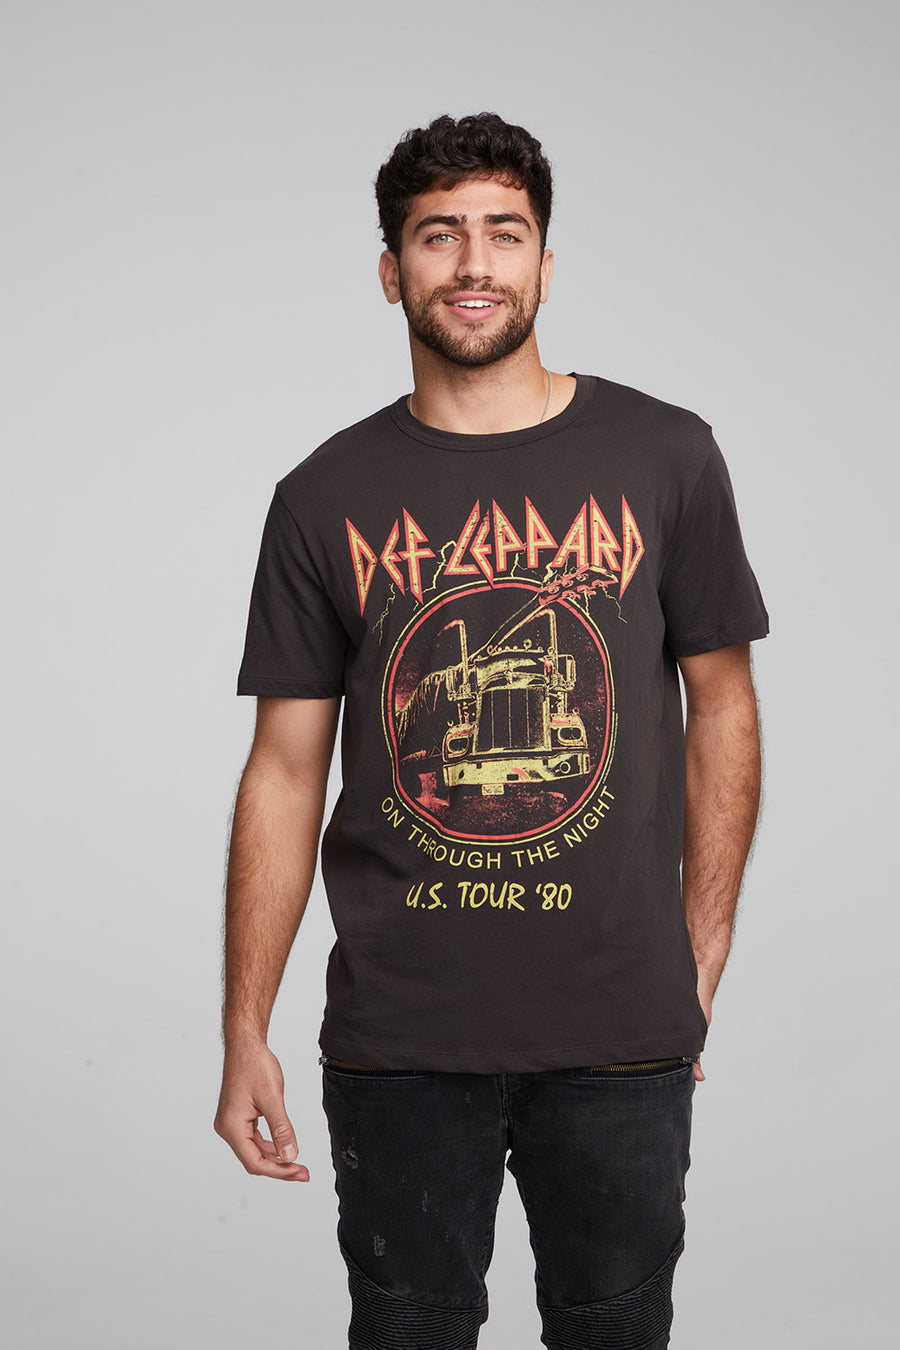 Def Leppard On Through The Night Crew Neck Tee MENS chaserbrand